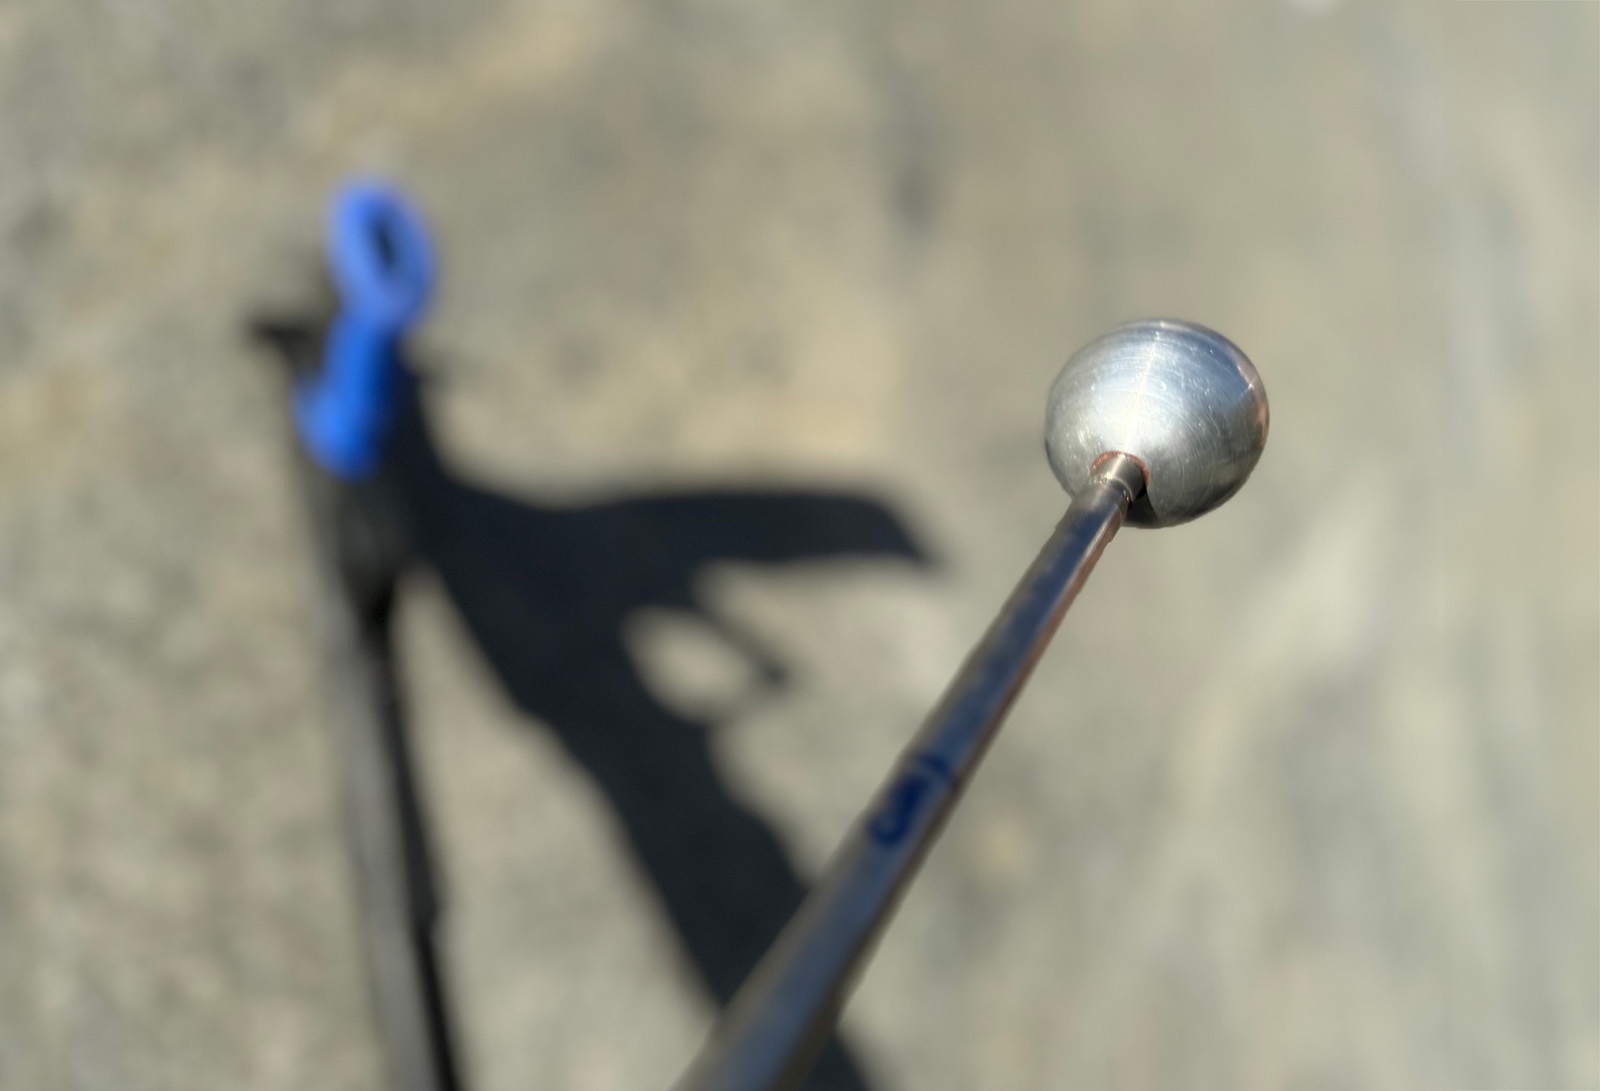 The spear can be fitted with a range of tips, including this spherical penetrometer.